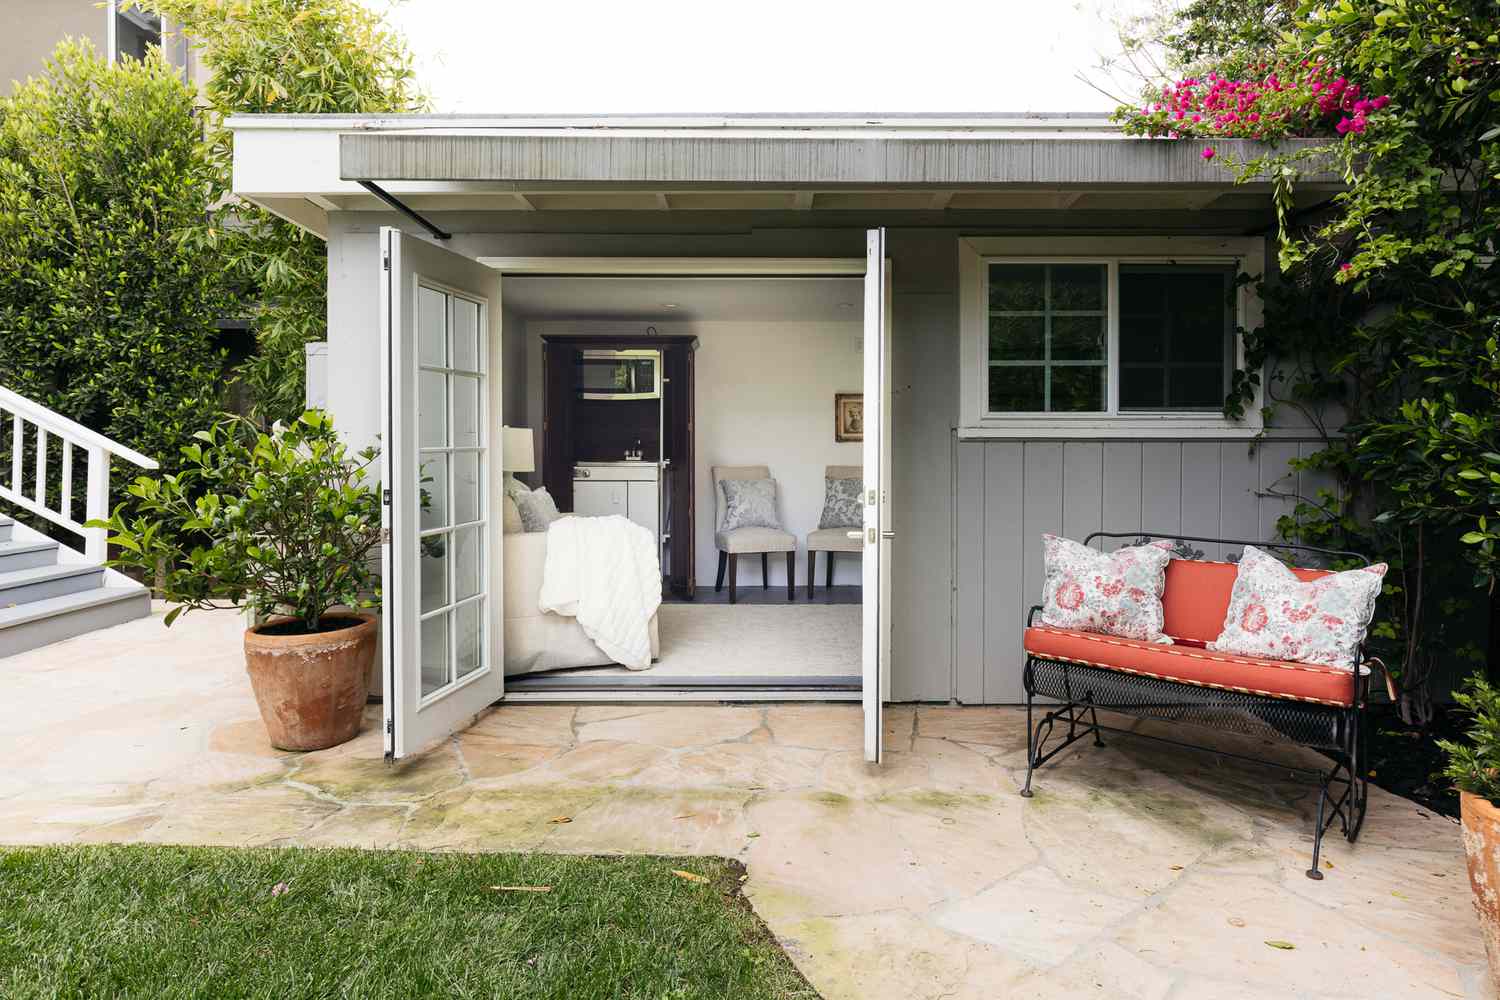 Inspirational Ideas For Making Your Shed Into a Relaxing Space